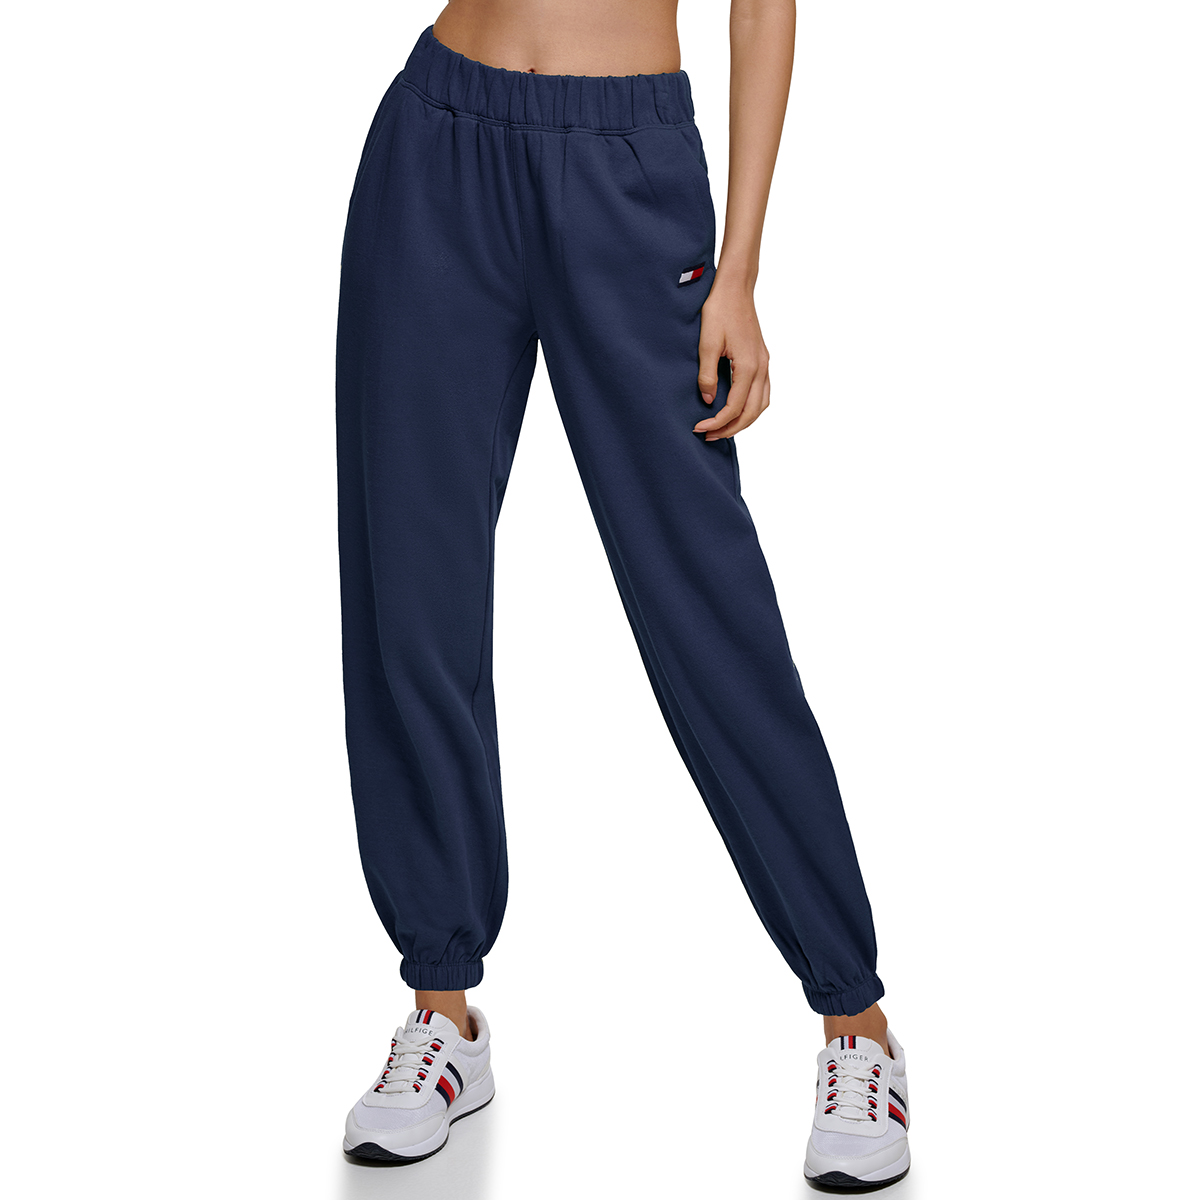 Tommy Hilfiger Women's Relaxed-Fit Sweatpants